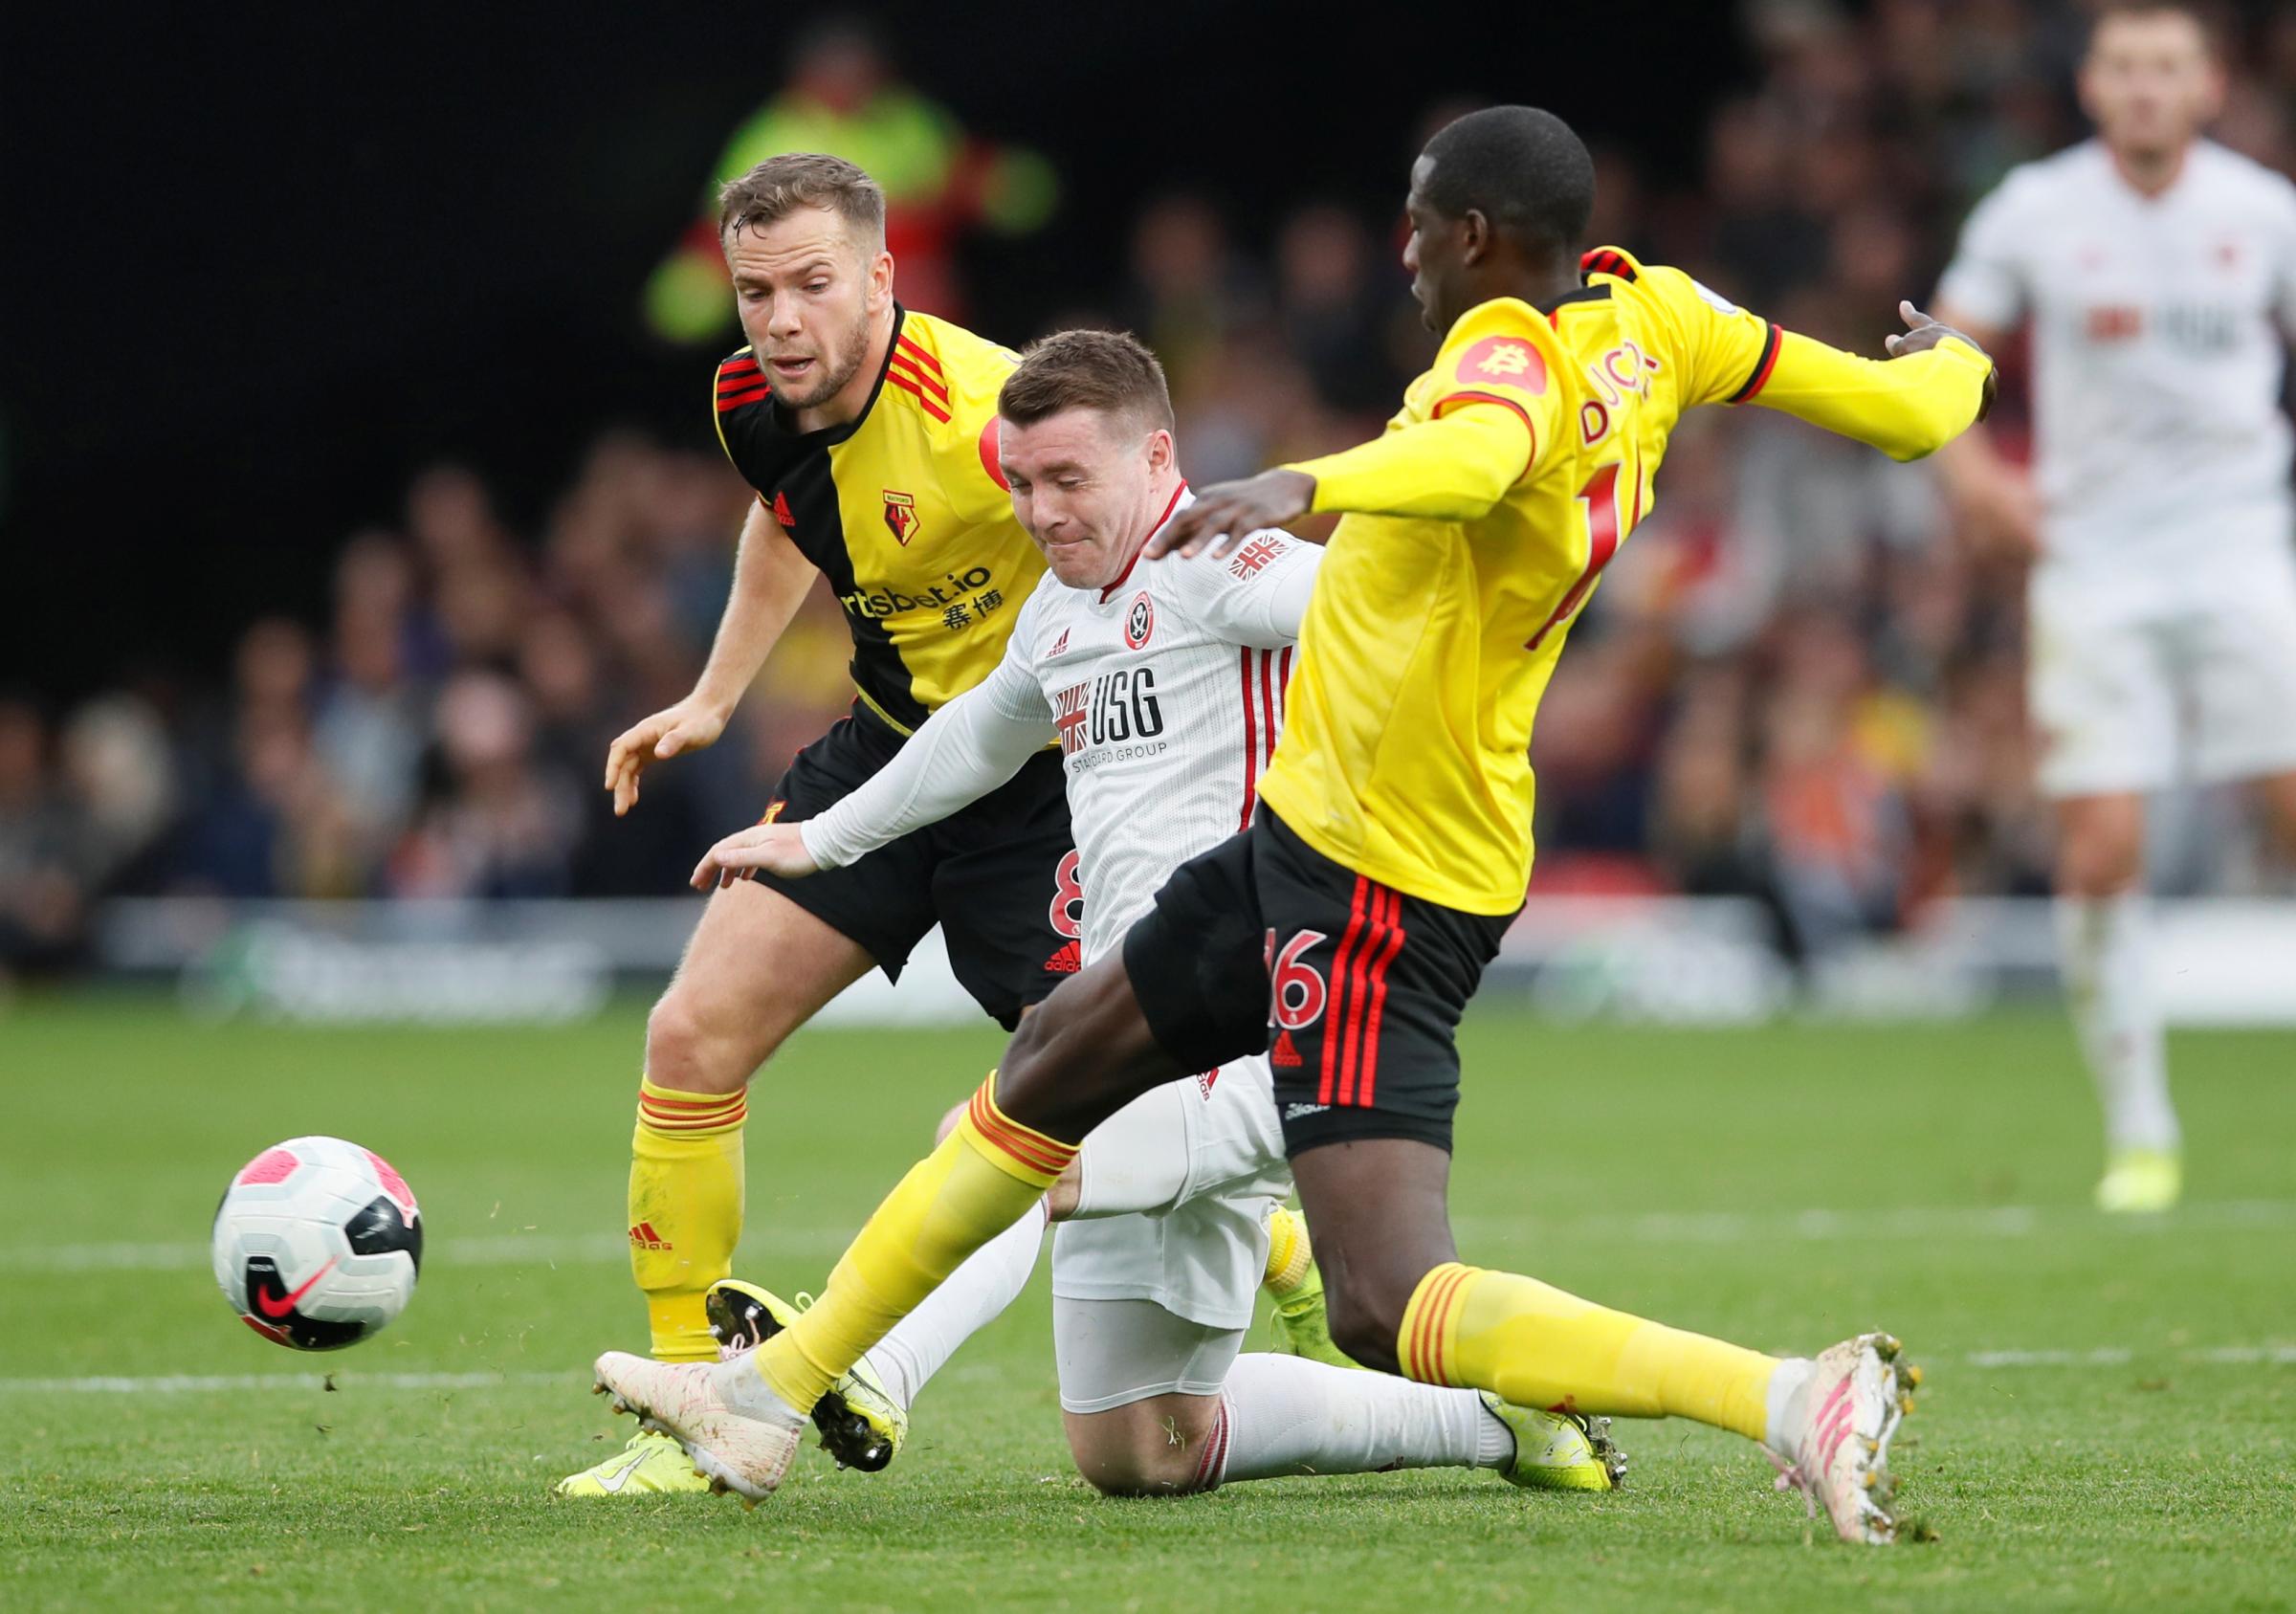 Watford's Championship fixtures for 2022/23 season revealed